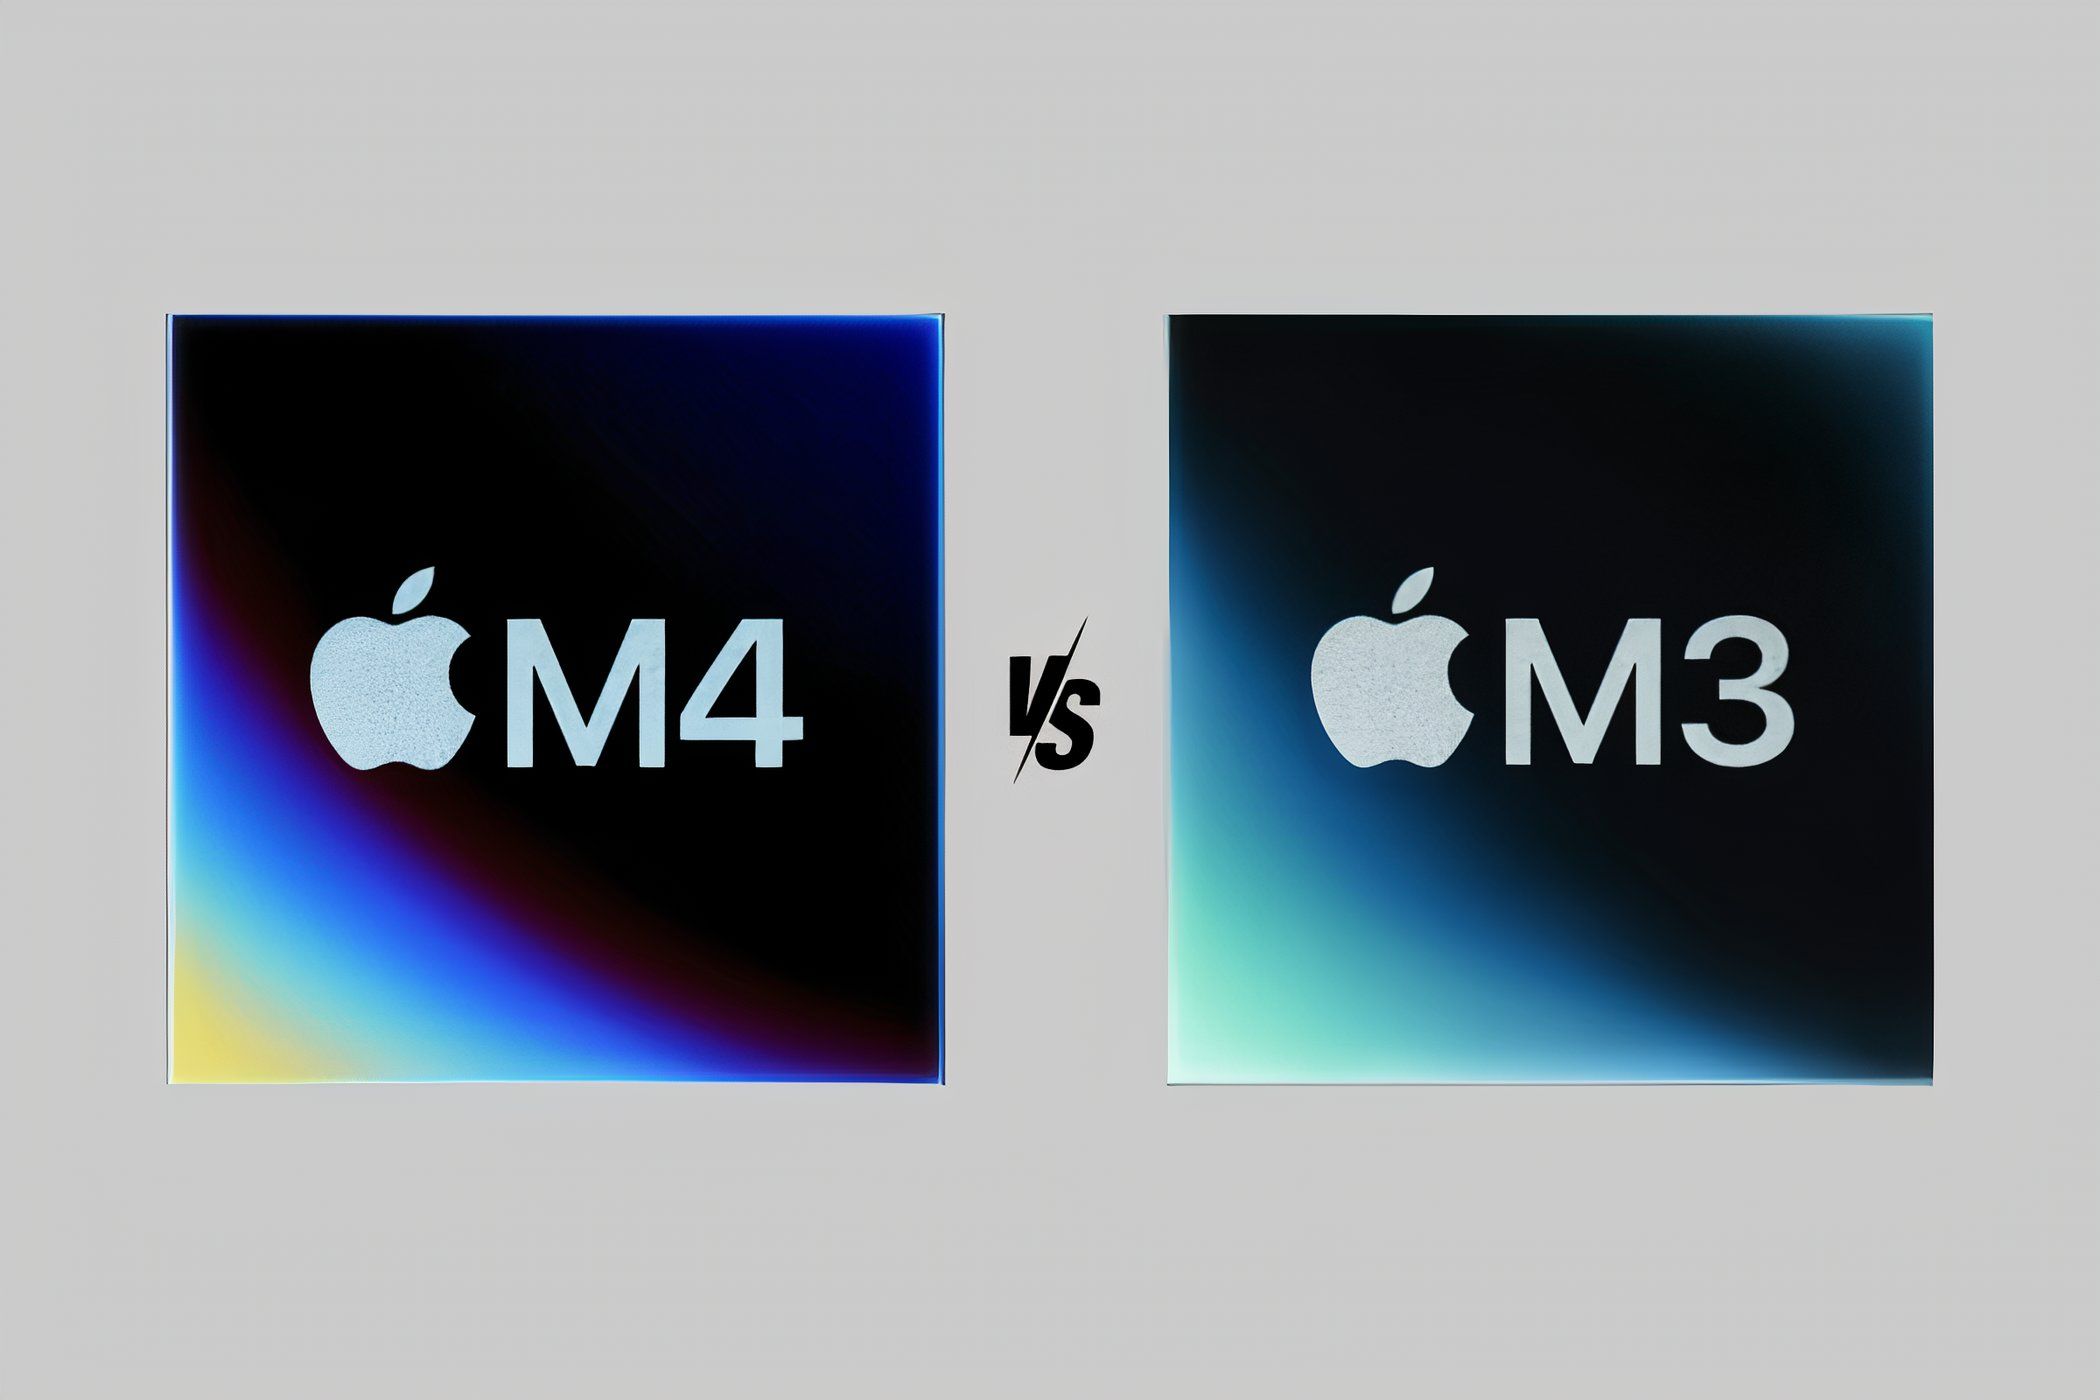 Image of the Apple M4 chip on the left and the Apple M3 chip on the right with a versus symbol in between.